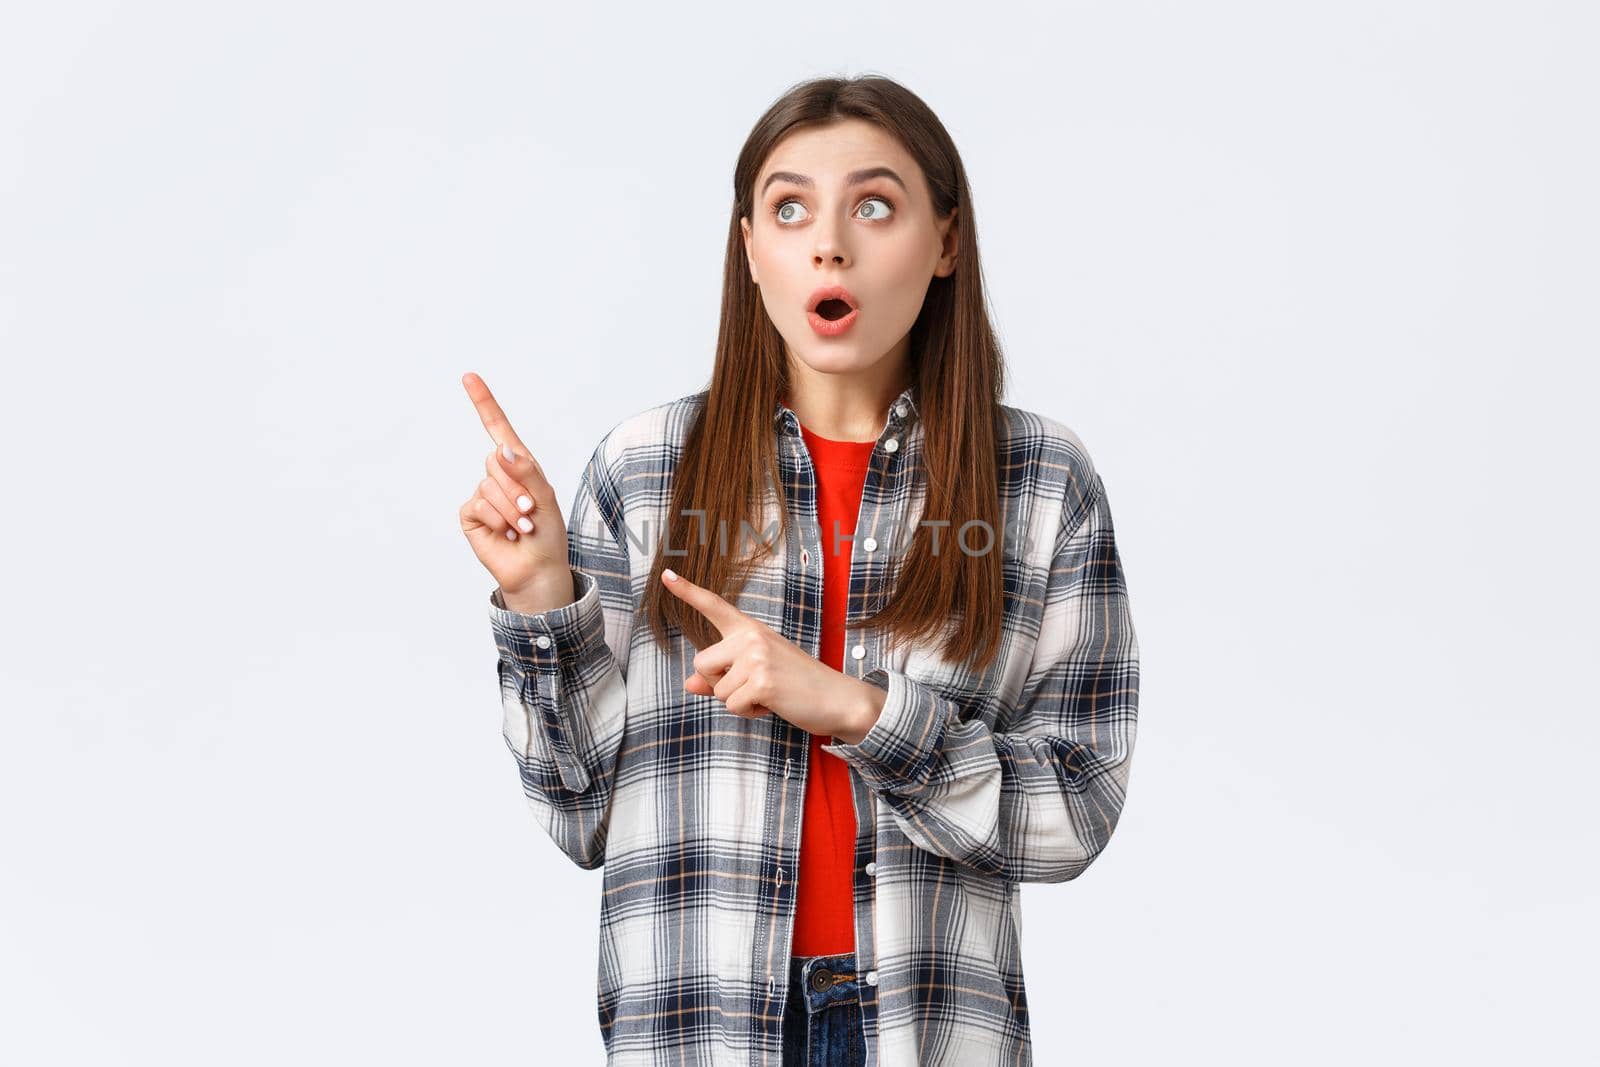 Lifestyle, different emotions, leisure activities concept. Amused attractive girl, european woman in checked shirt pointing and looking upper left corner, captured attention to awesome promo.